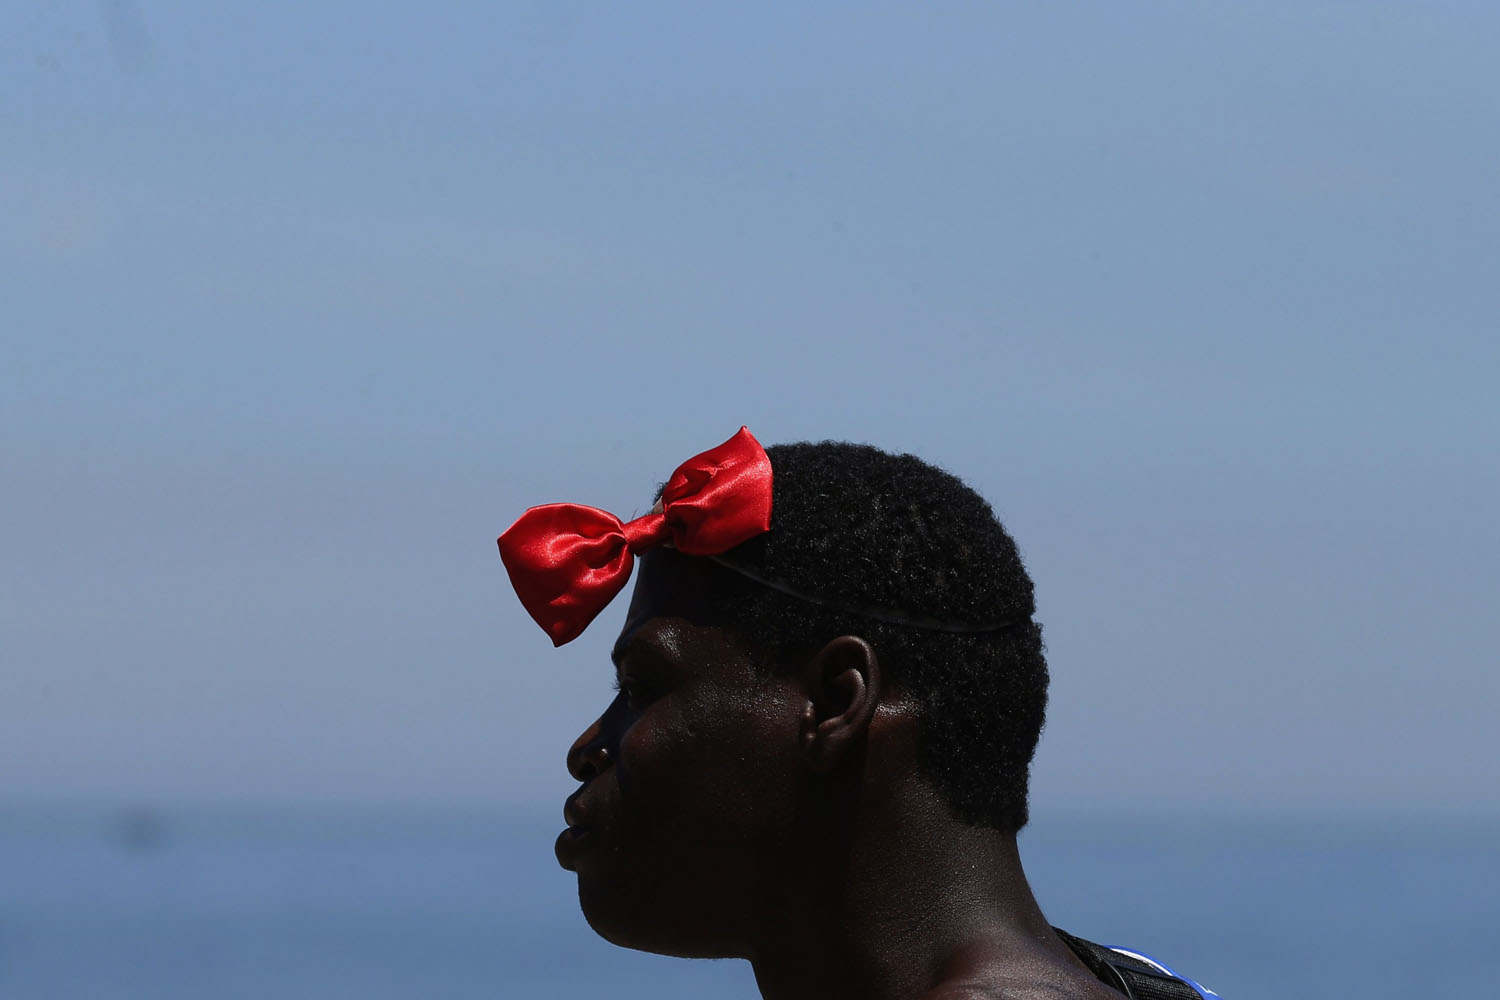 Man wears bow tie as he takes part in the annual block party known as the "Banda de Ipanema" during pre-carnival festivities on Ipanema beach in Rio de Janeiro